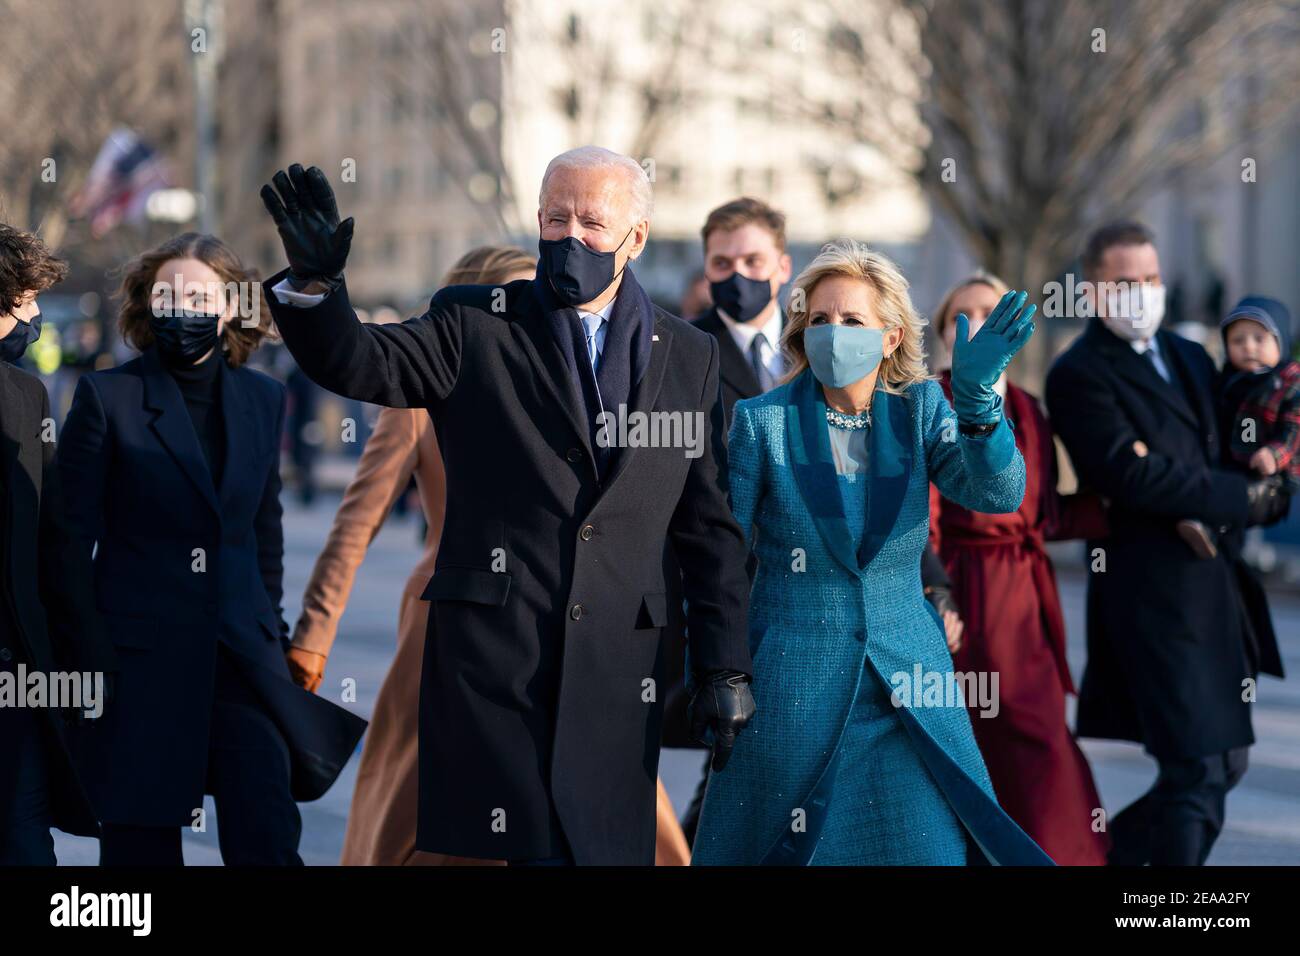 President Joe Biden and First Lady Dr. Jill Biden wave Wednesday, Jan. 20, 2021, as they walk along Pennsylvania Ave. to the White House during the inaugural parade. (Official White House Photo by Adam Schultz) Stock Photo